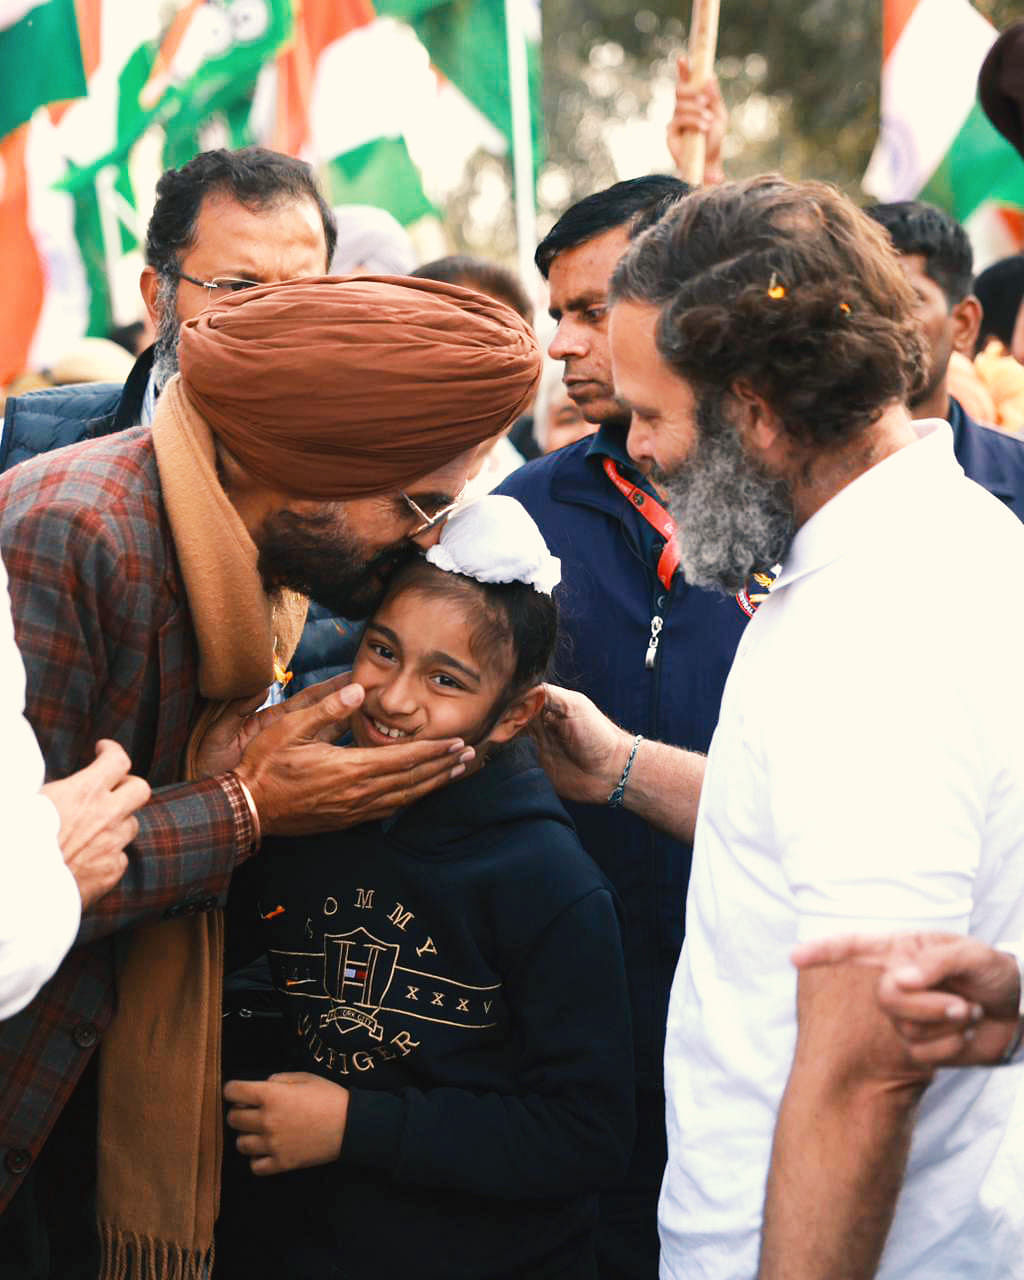 The Bharat Jodo Yatra's Punjab lap came to an end in Punjab. In about 10 days, the party covered 5 Lok Sabha seats. 